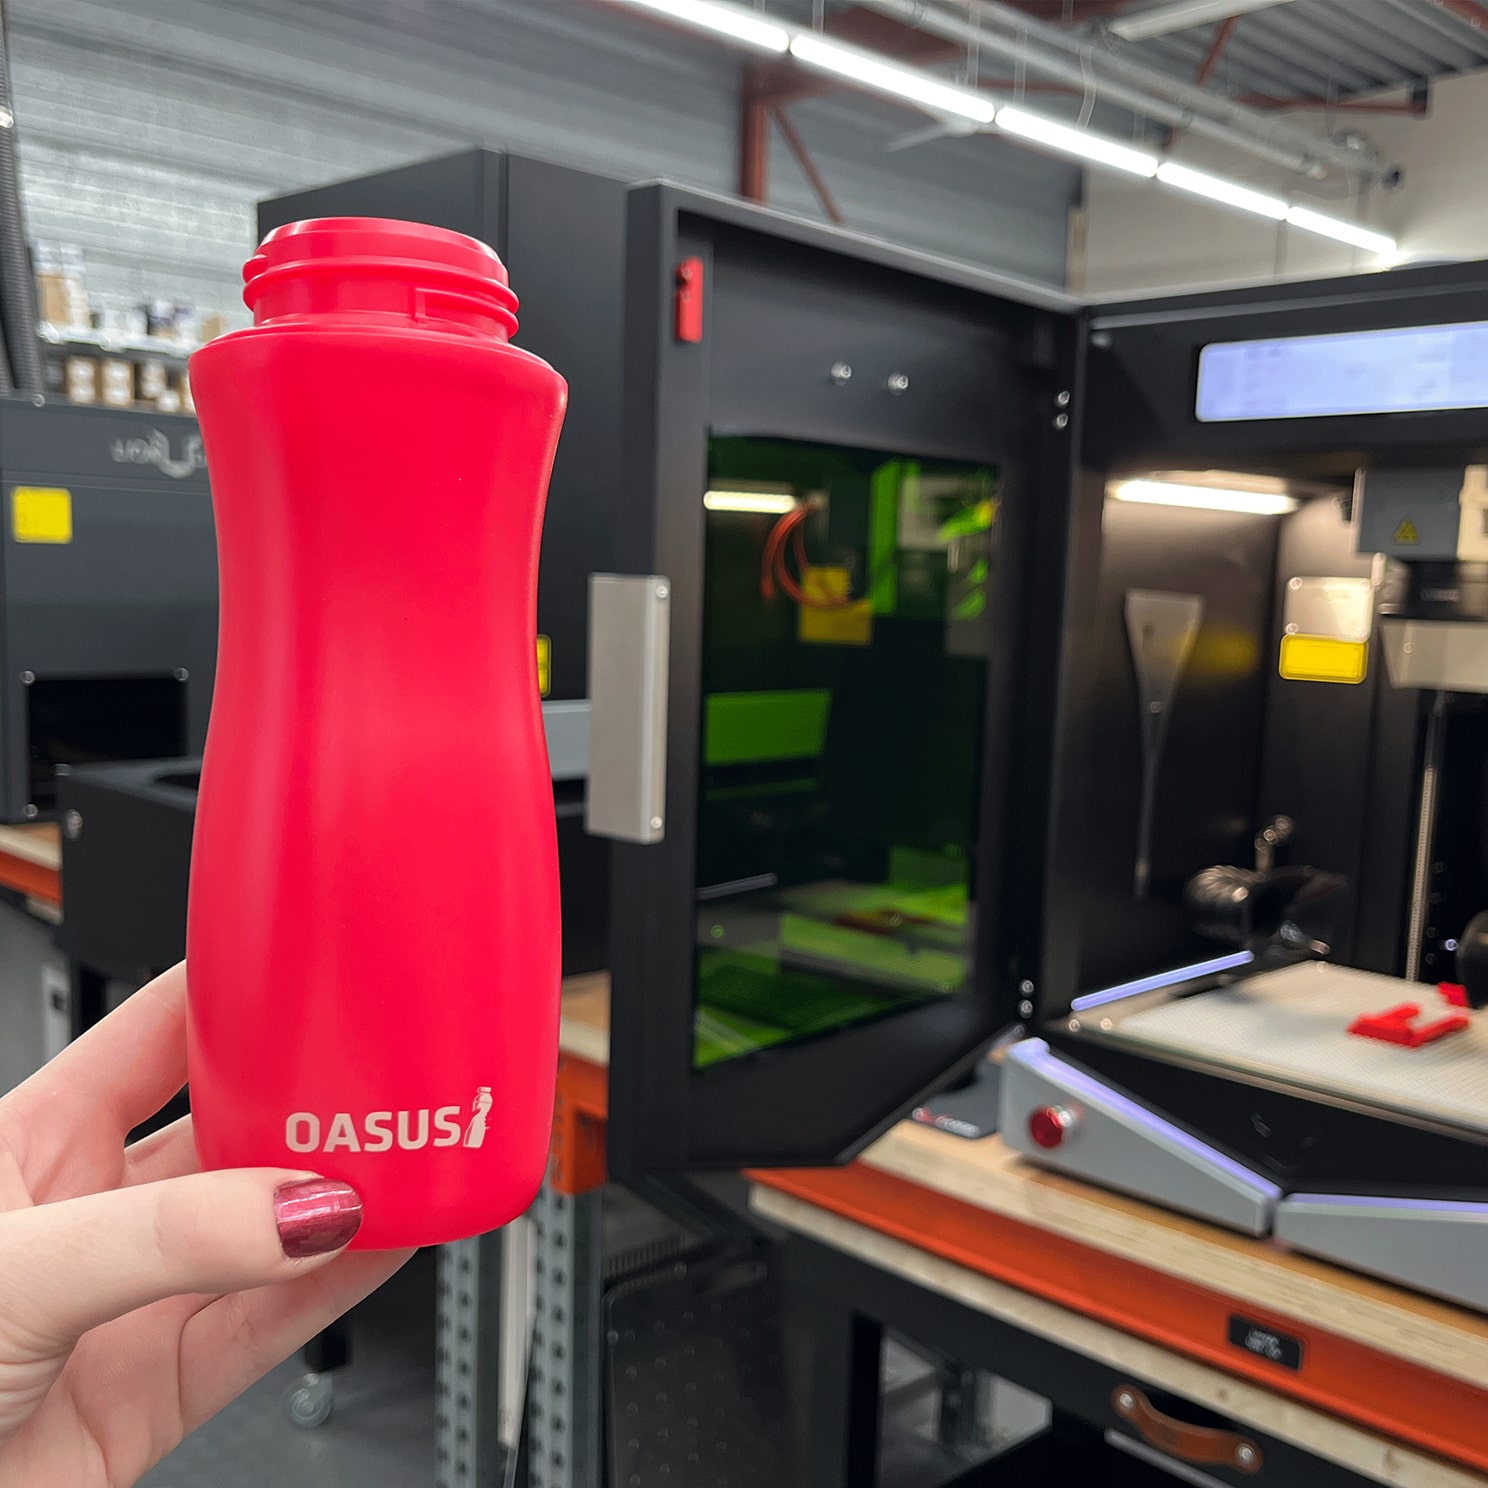 Laser engraving on a red Oasus water bottle